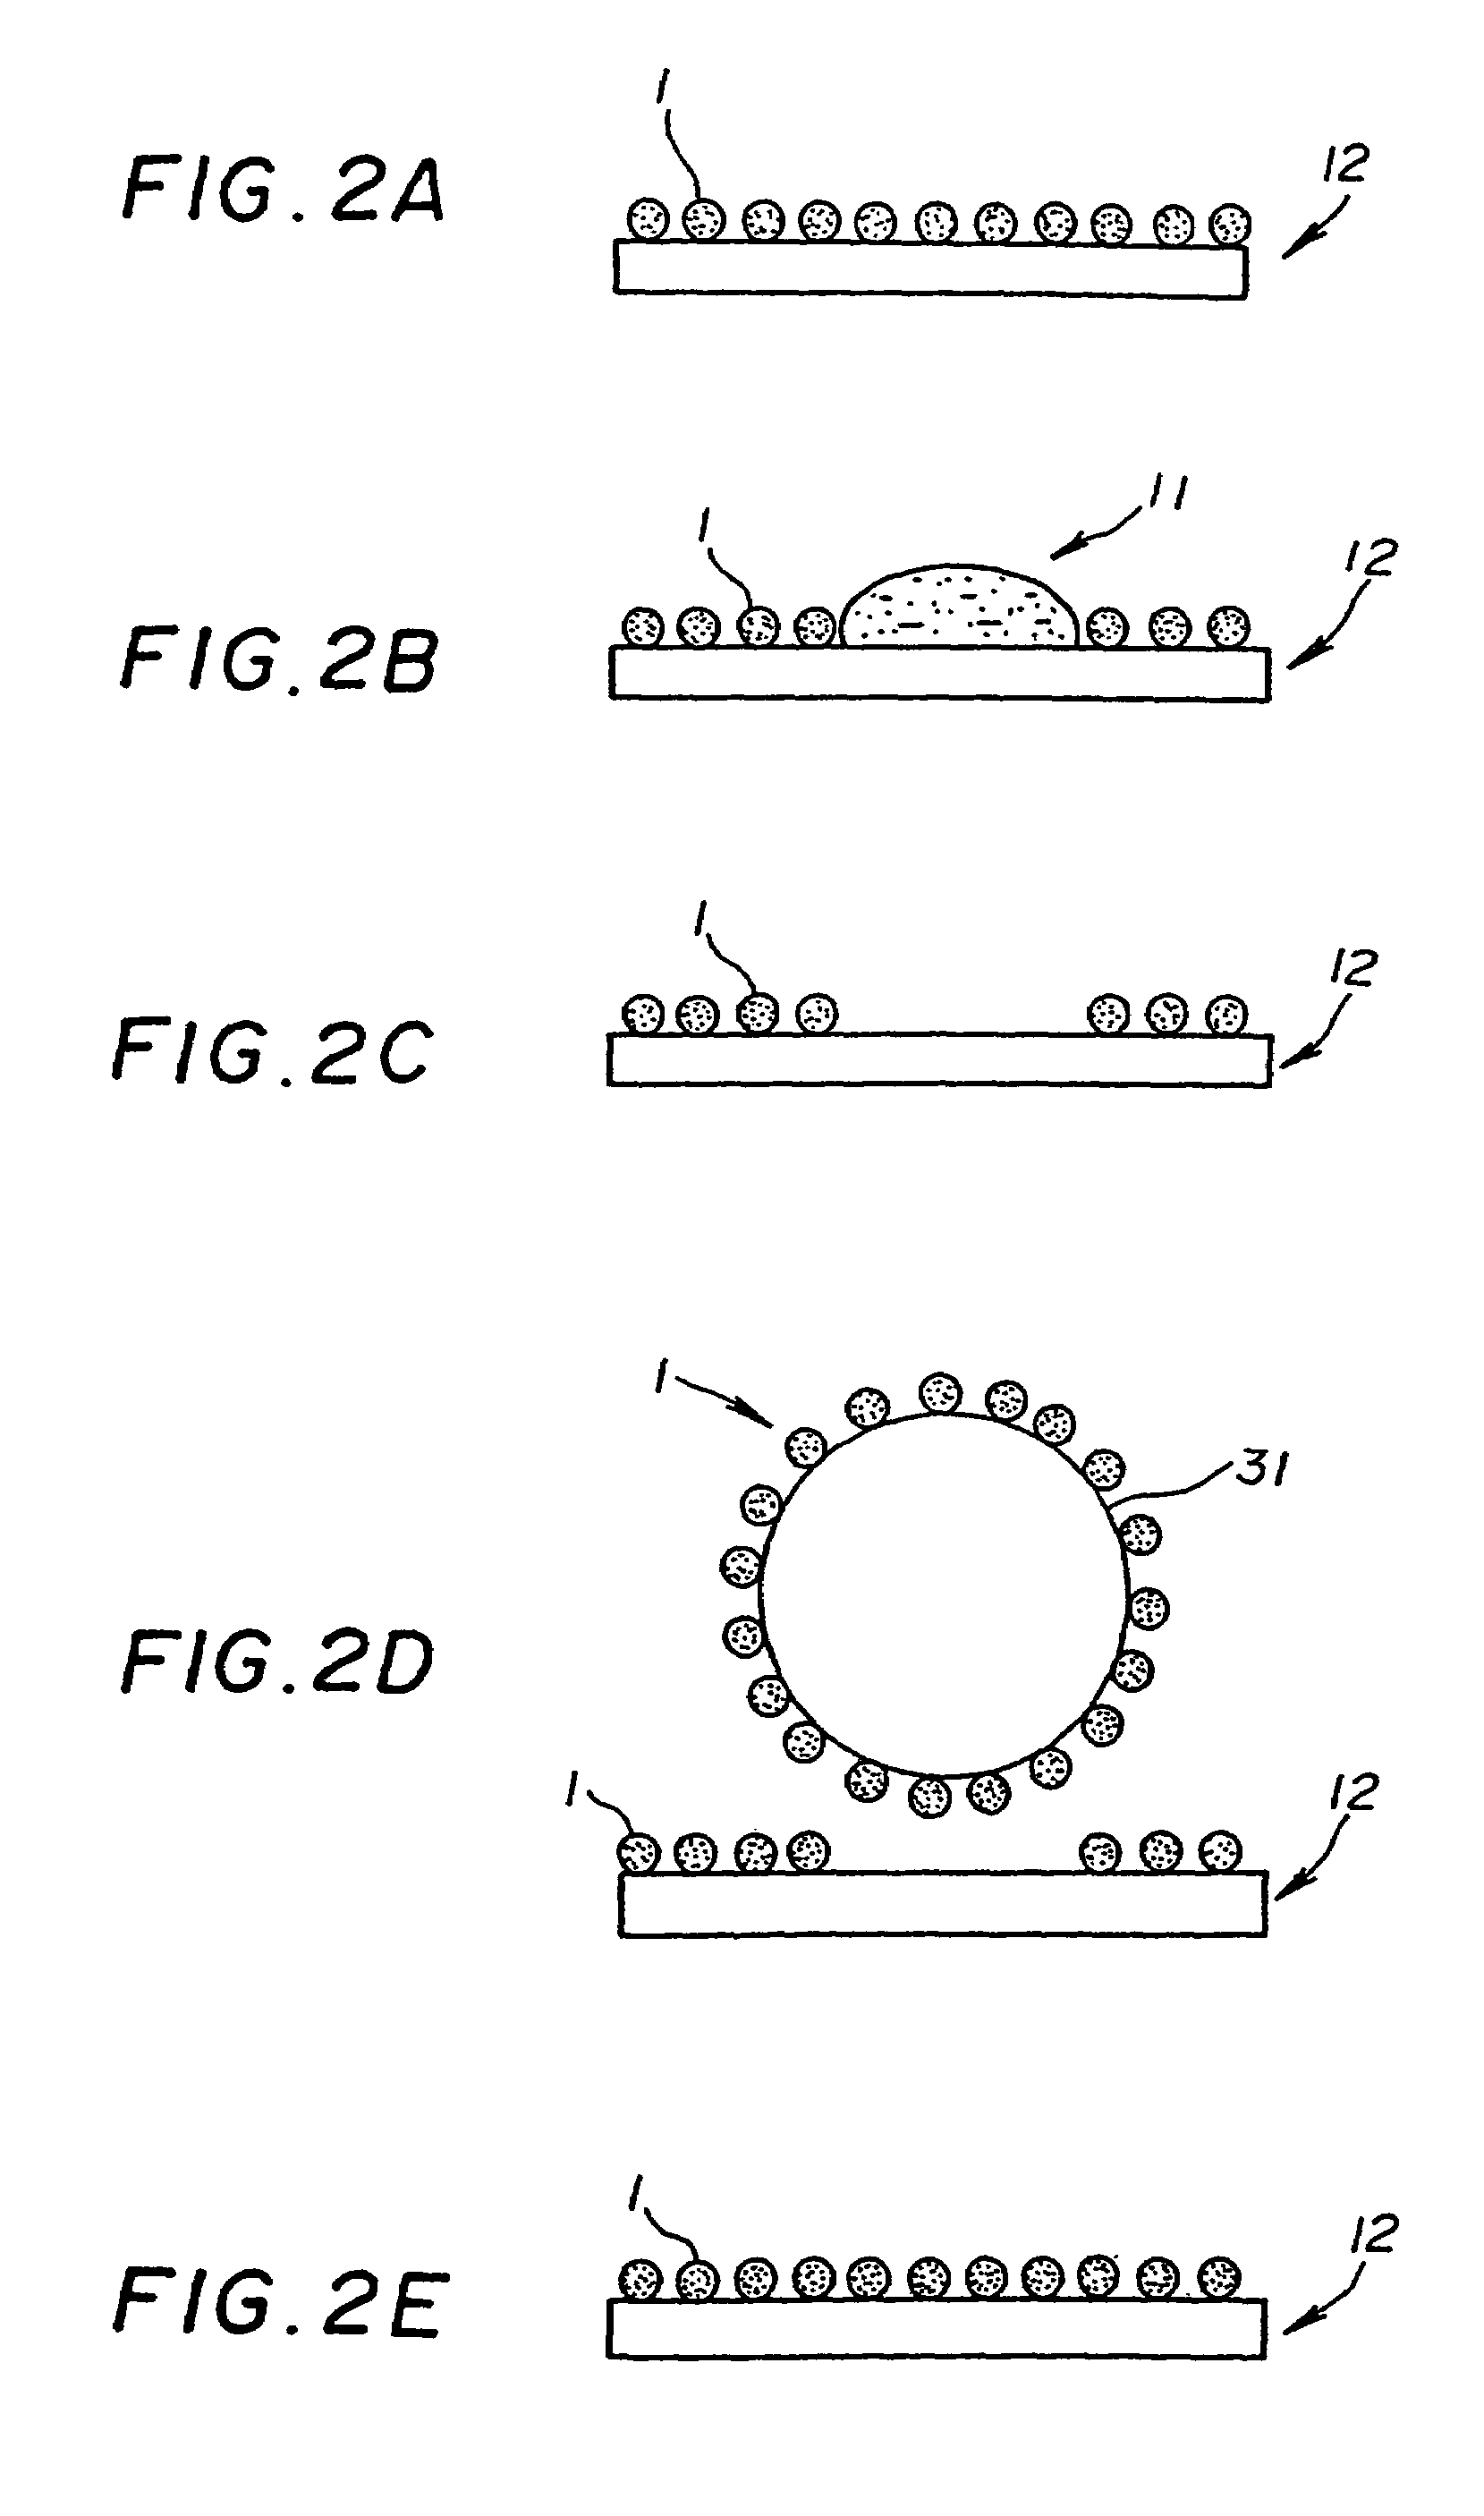 Recording method and apparatus with an intermediate transfer medium based on transfer-type recording mechanism